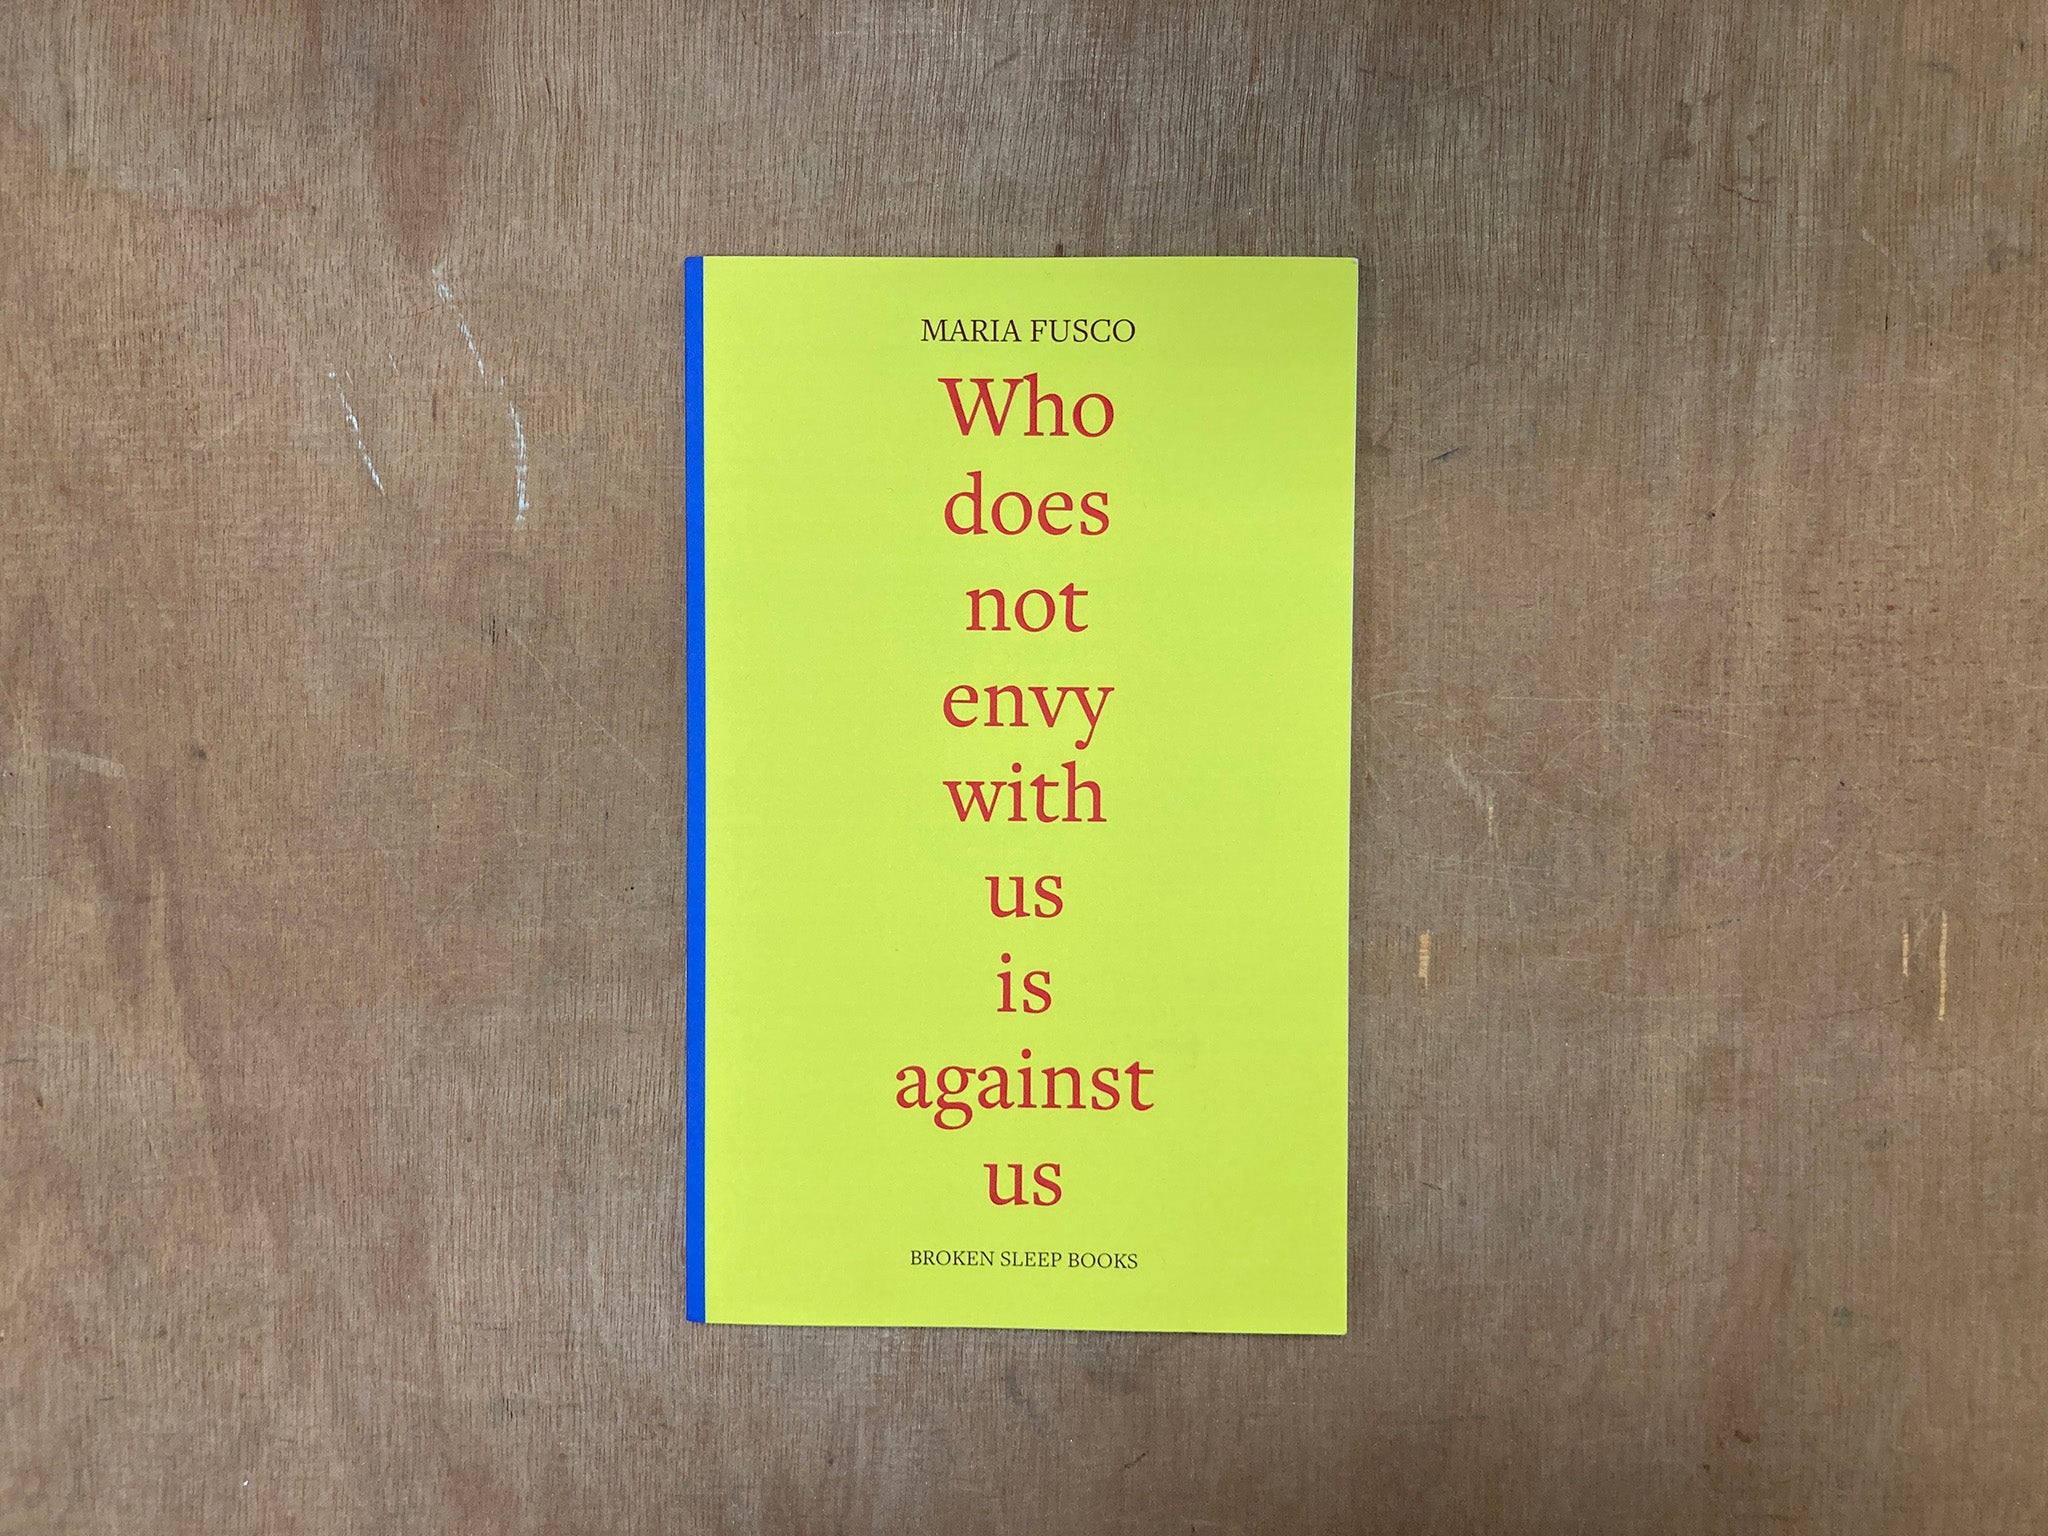 WHO DOES NOT ENVY WITH US IS AGAINST US by Maria Fusco